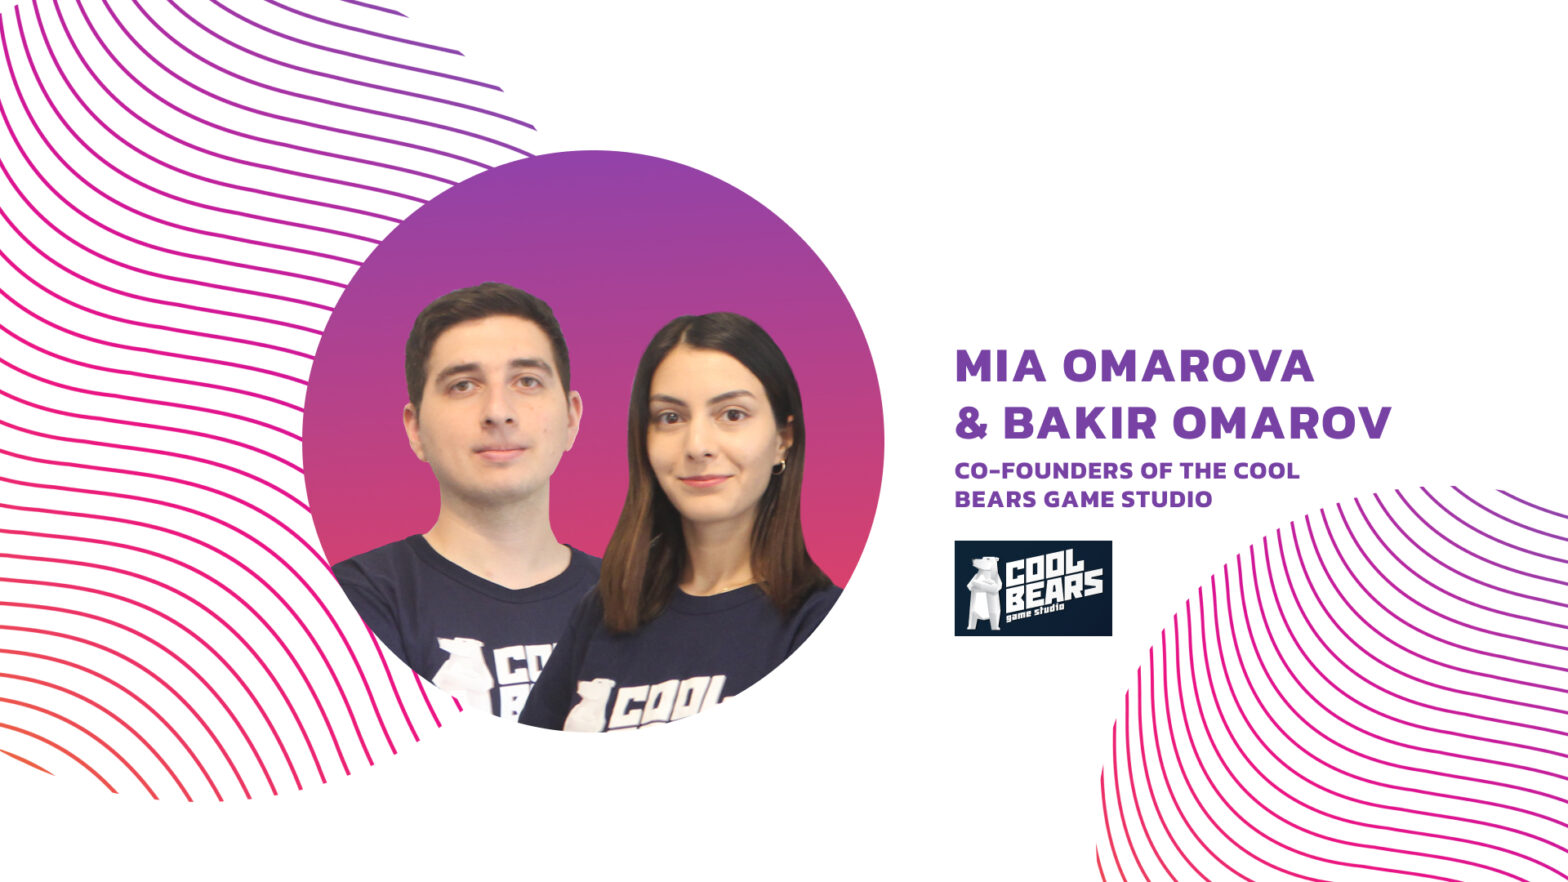 “3 million players worldwide with 0 budget for marketing”. Interview with Bakir Omarov & Mia Omarova at Cool Bears